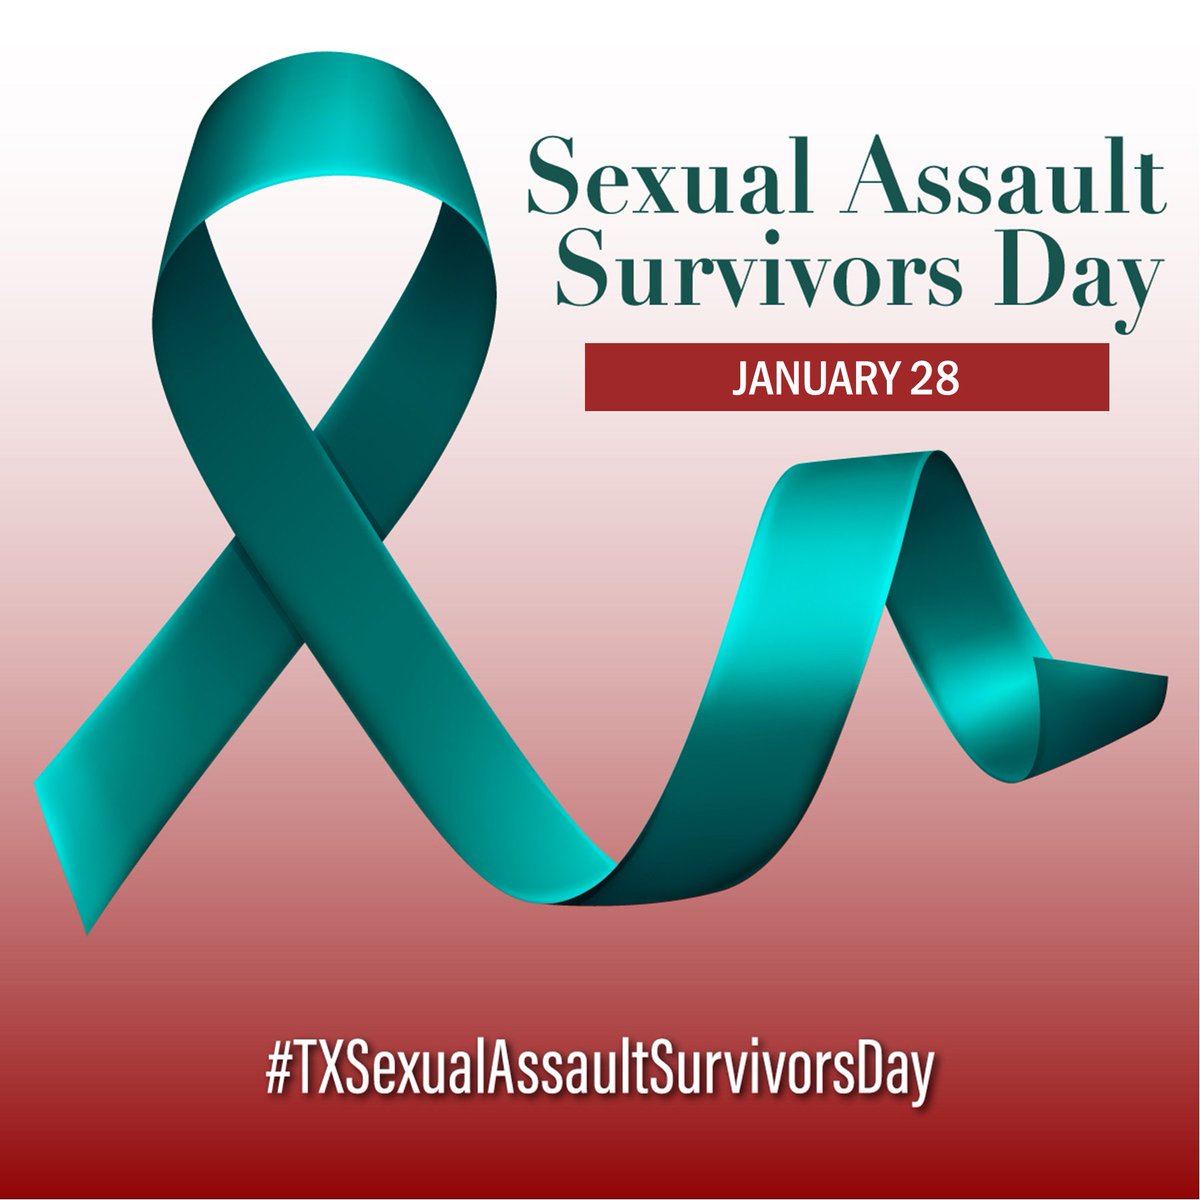 Today is Sexual Assault Survivors Day in Texas - a chance to raise awareness, empower survivors across our state, and work to bring perpetrators to justice. National Sexual Assault Hotline: 1-800-656-HOPE #TXSexualAssaultSurvivorsDay